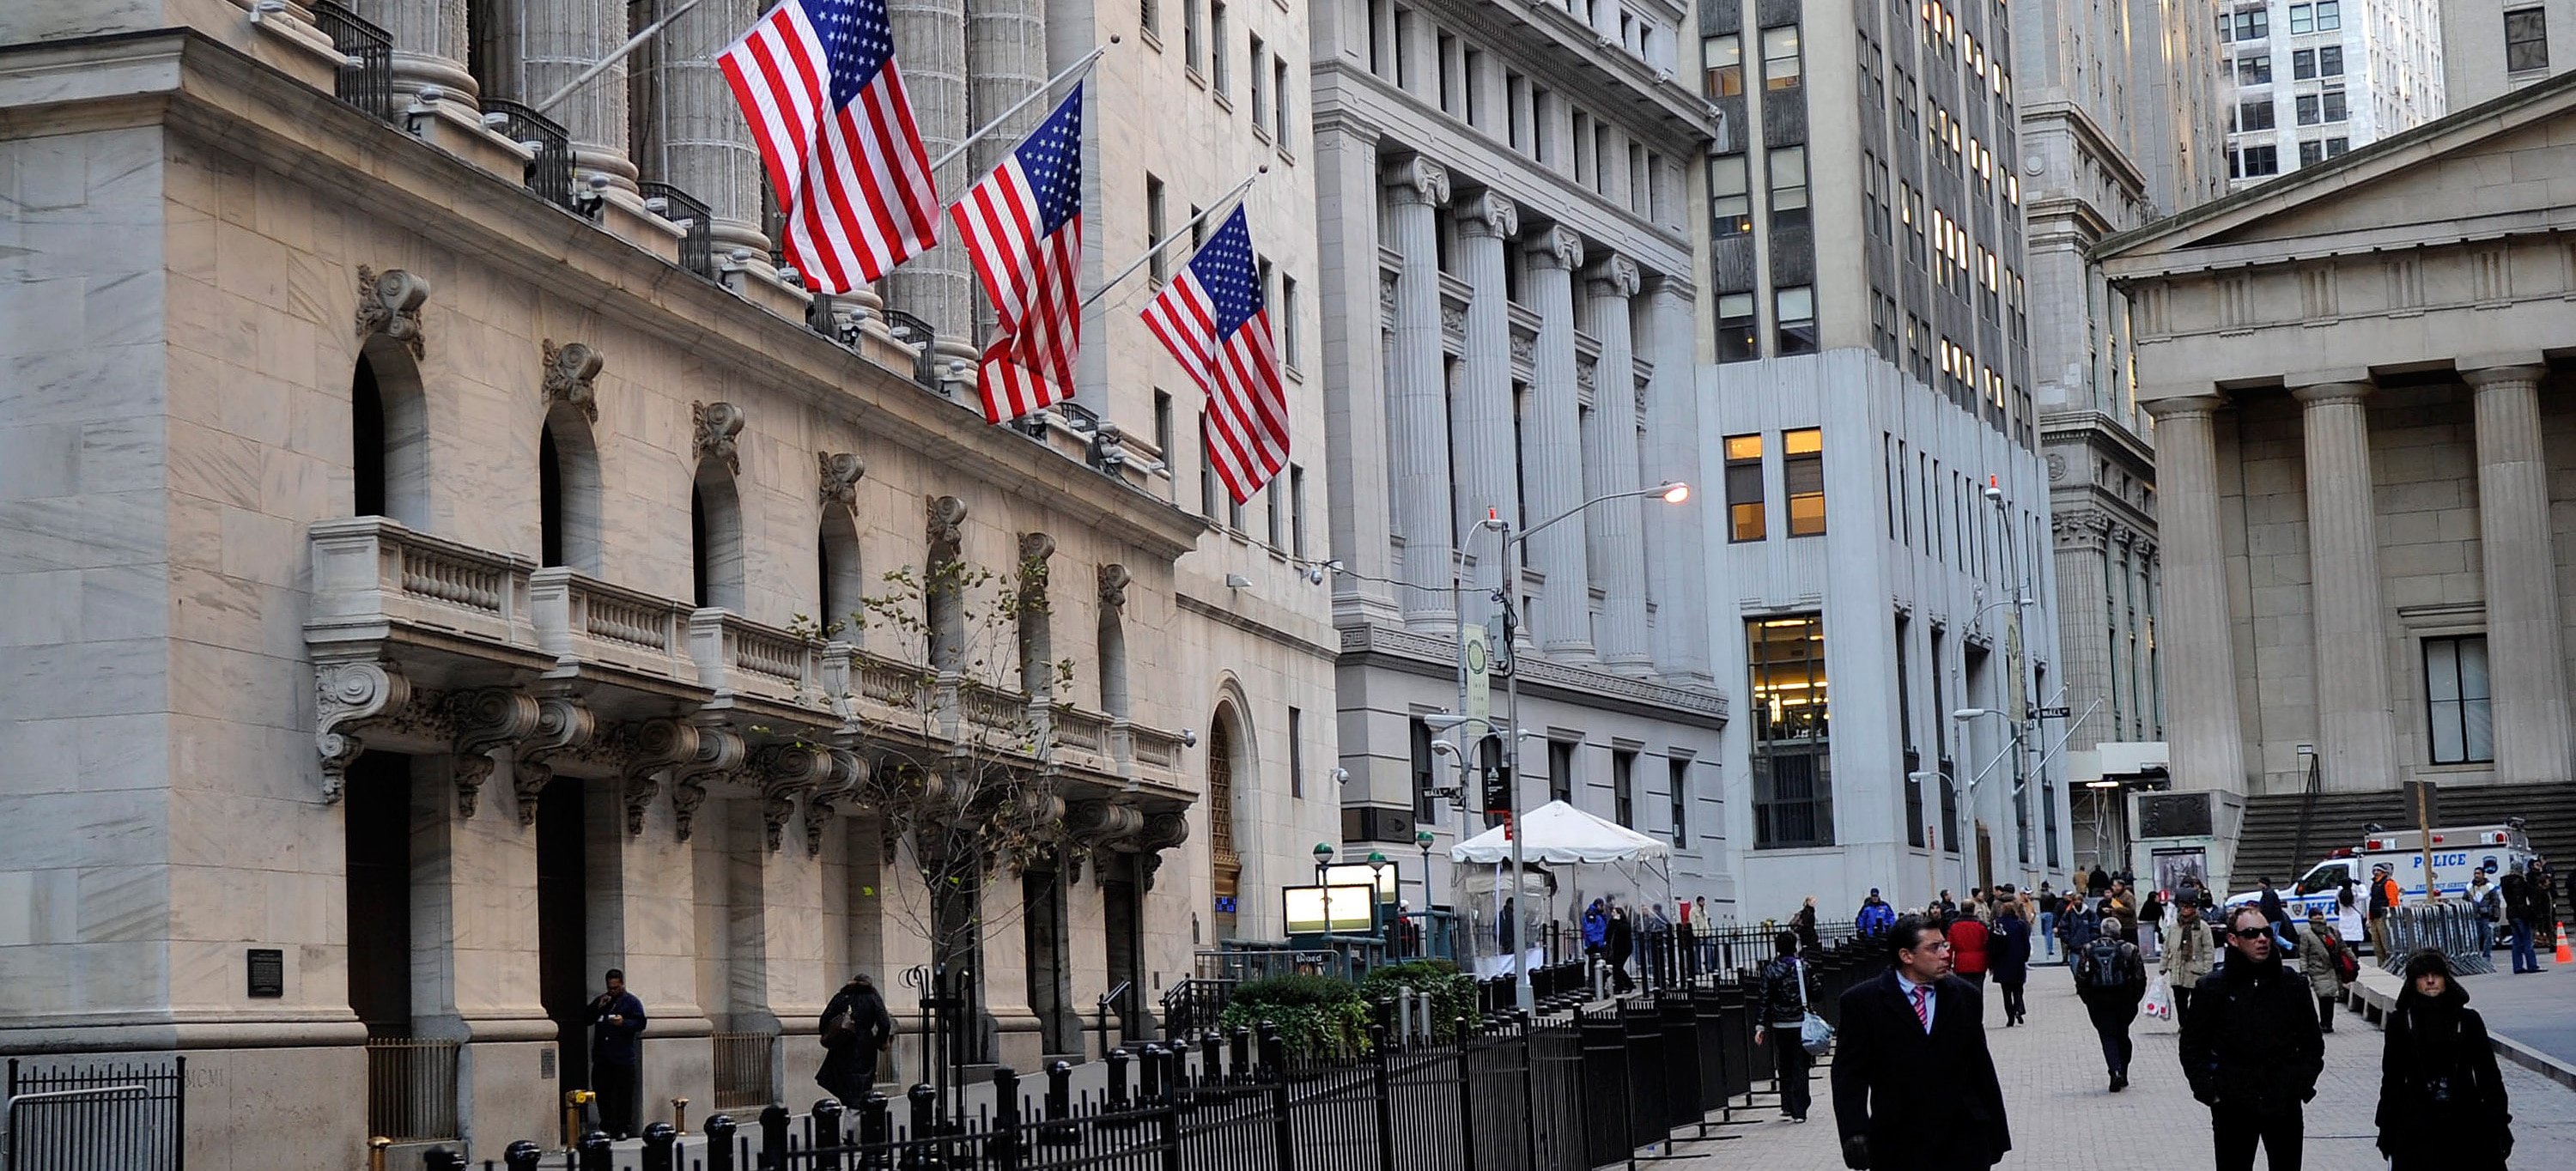 FX Banks Must Help Restore Public Trust in Markets, Says NY Fed